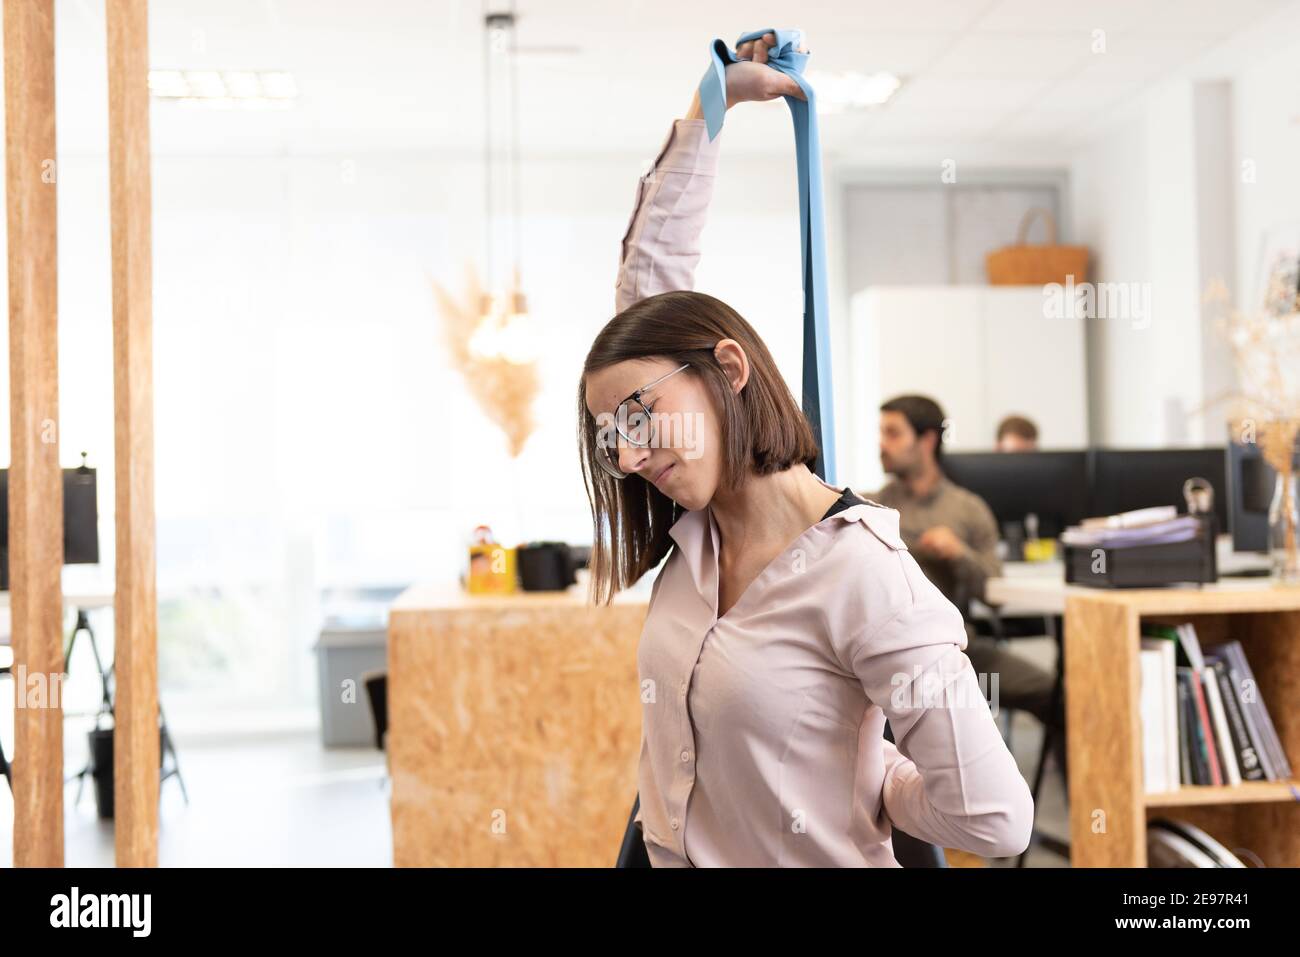 Healthy lifestyle in the workplace concept. Woman with backache or back pain  stretching with a pilates rubber band in the office. Stock Photo